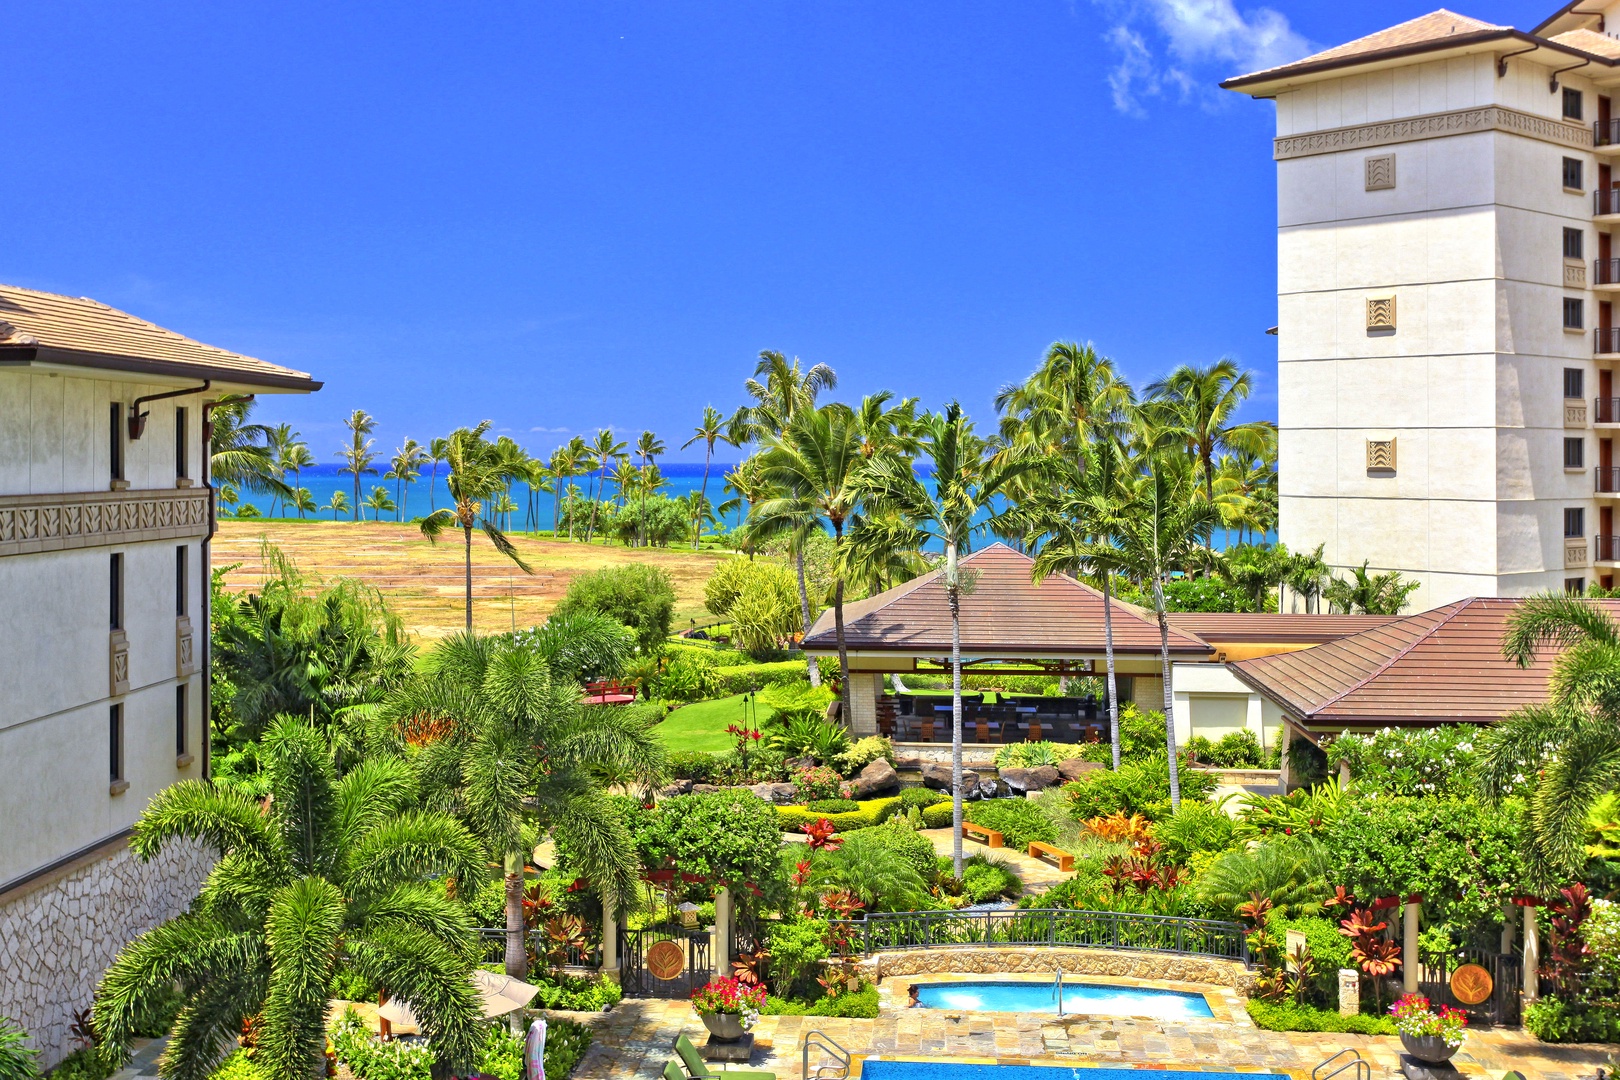 Kapolei Vacation Rentals, Ko Olina Beach Villas O1001 - View of the pool area with palm trees and lush greenery.